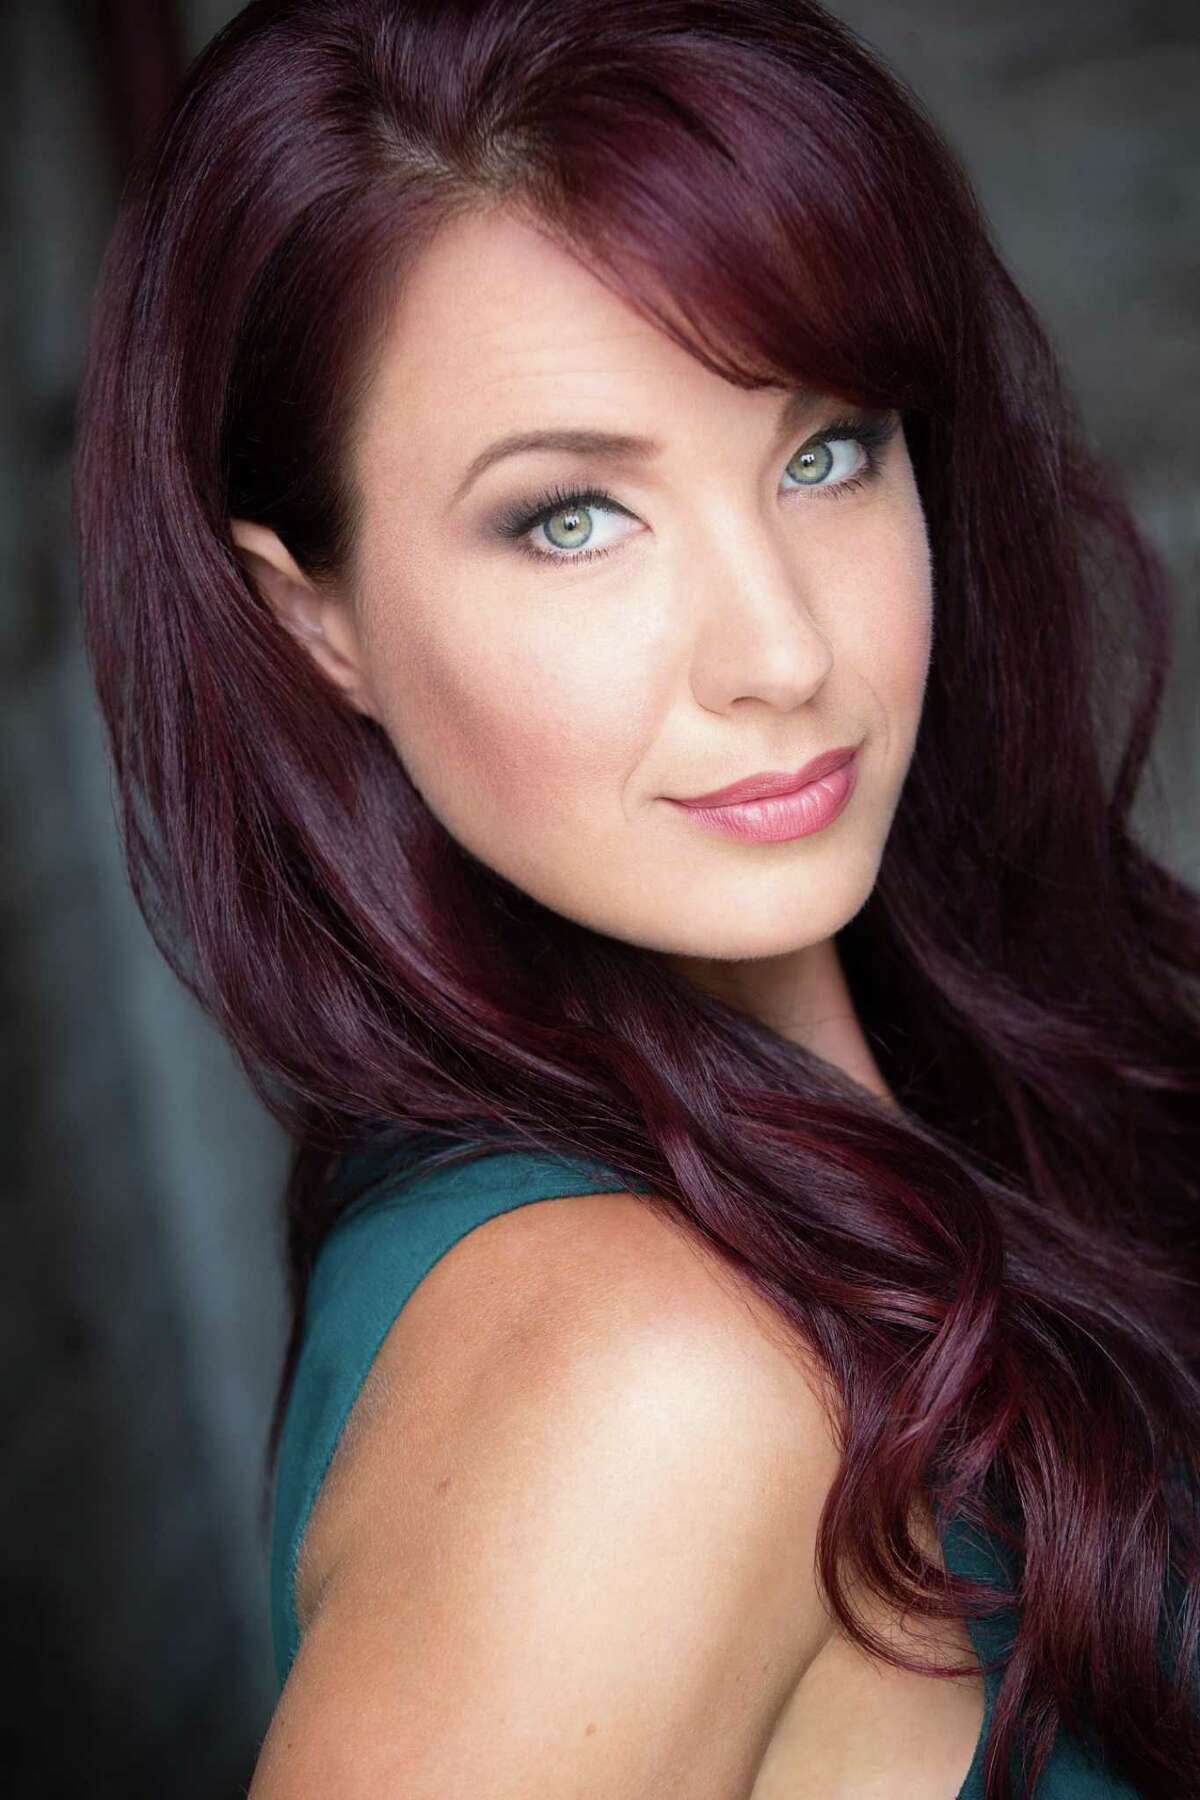 Sierra Boggess, who originated the role of Ariel in “The Little Mermaid” on Broadway, will portray Countess Ellen Olenska.